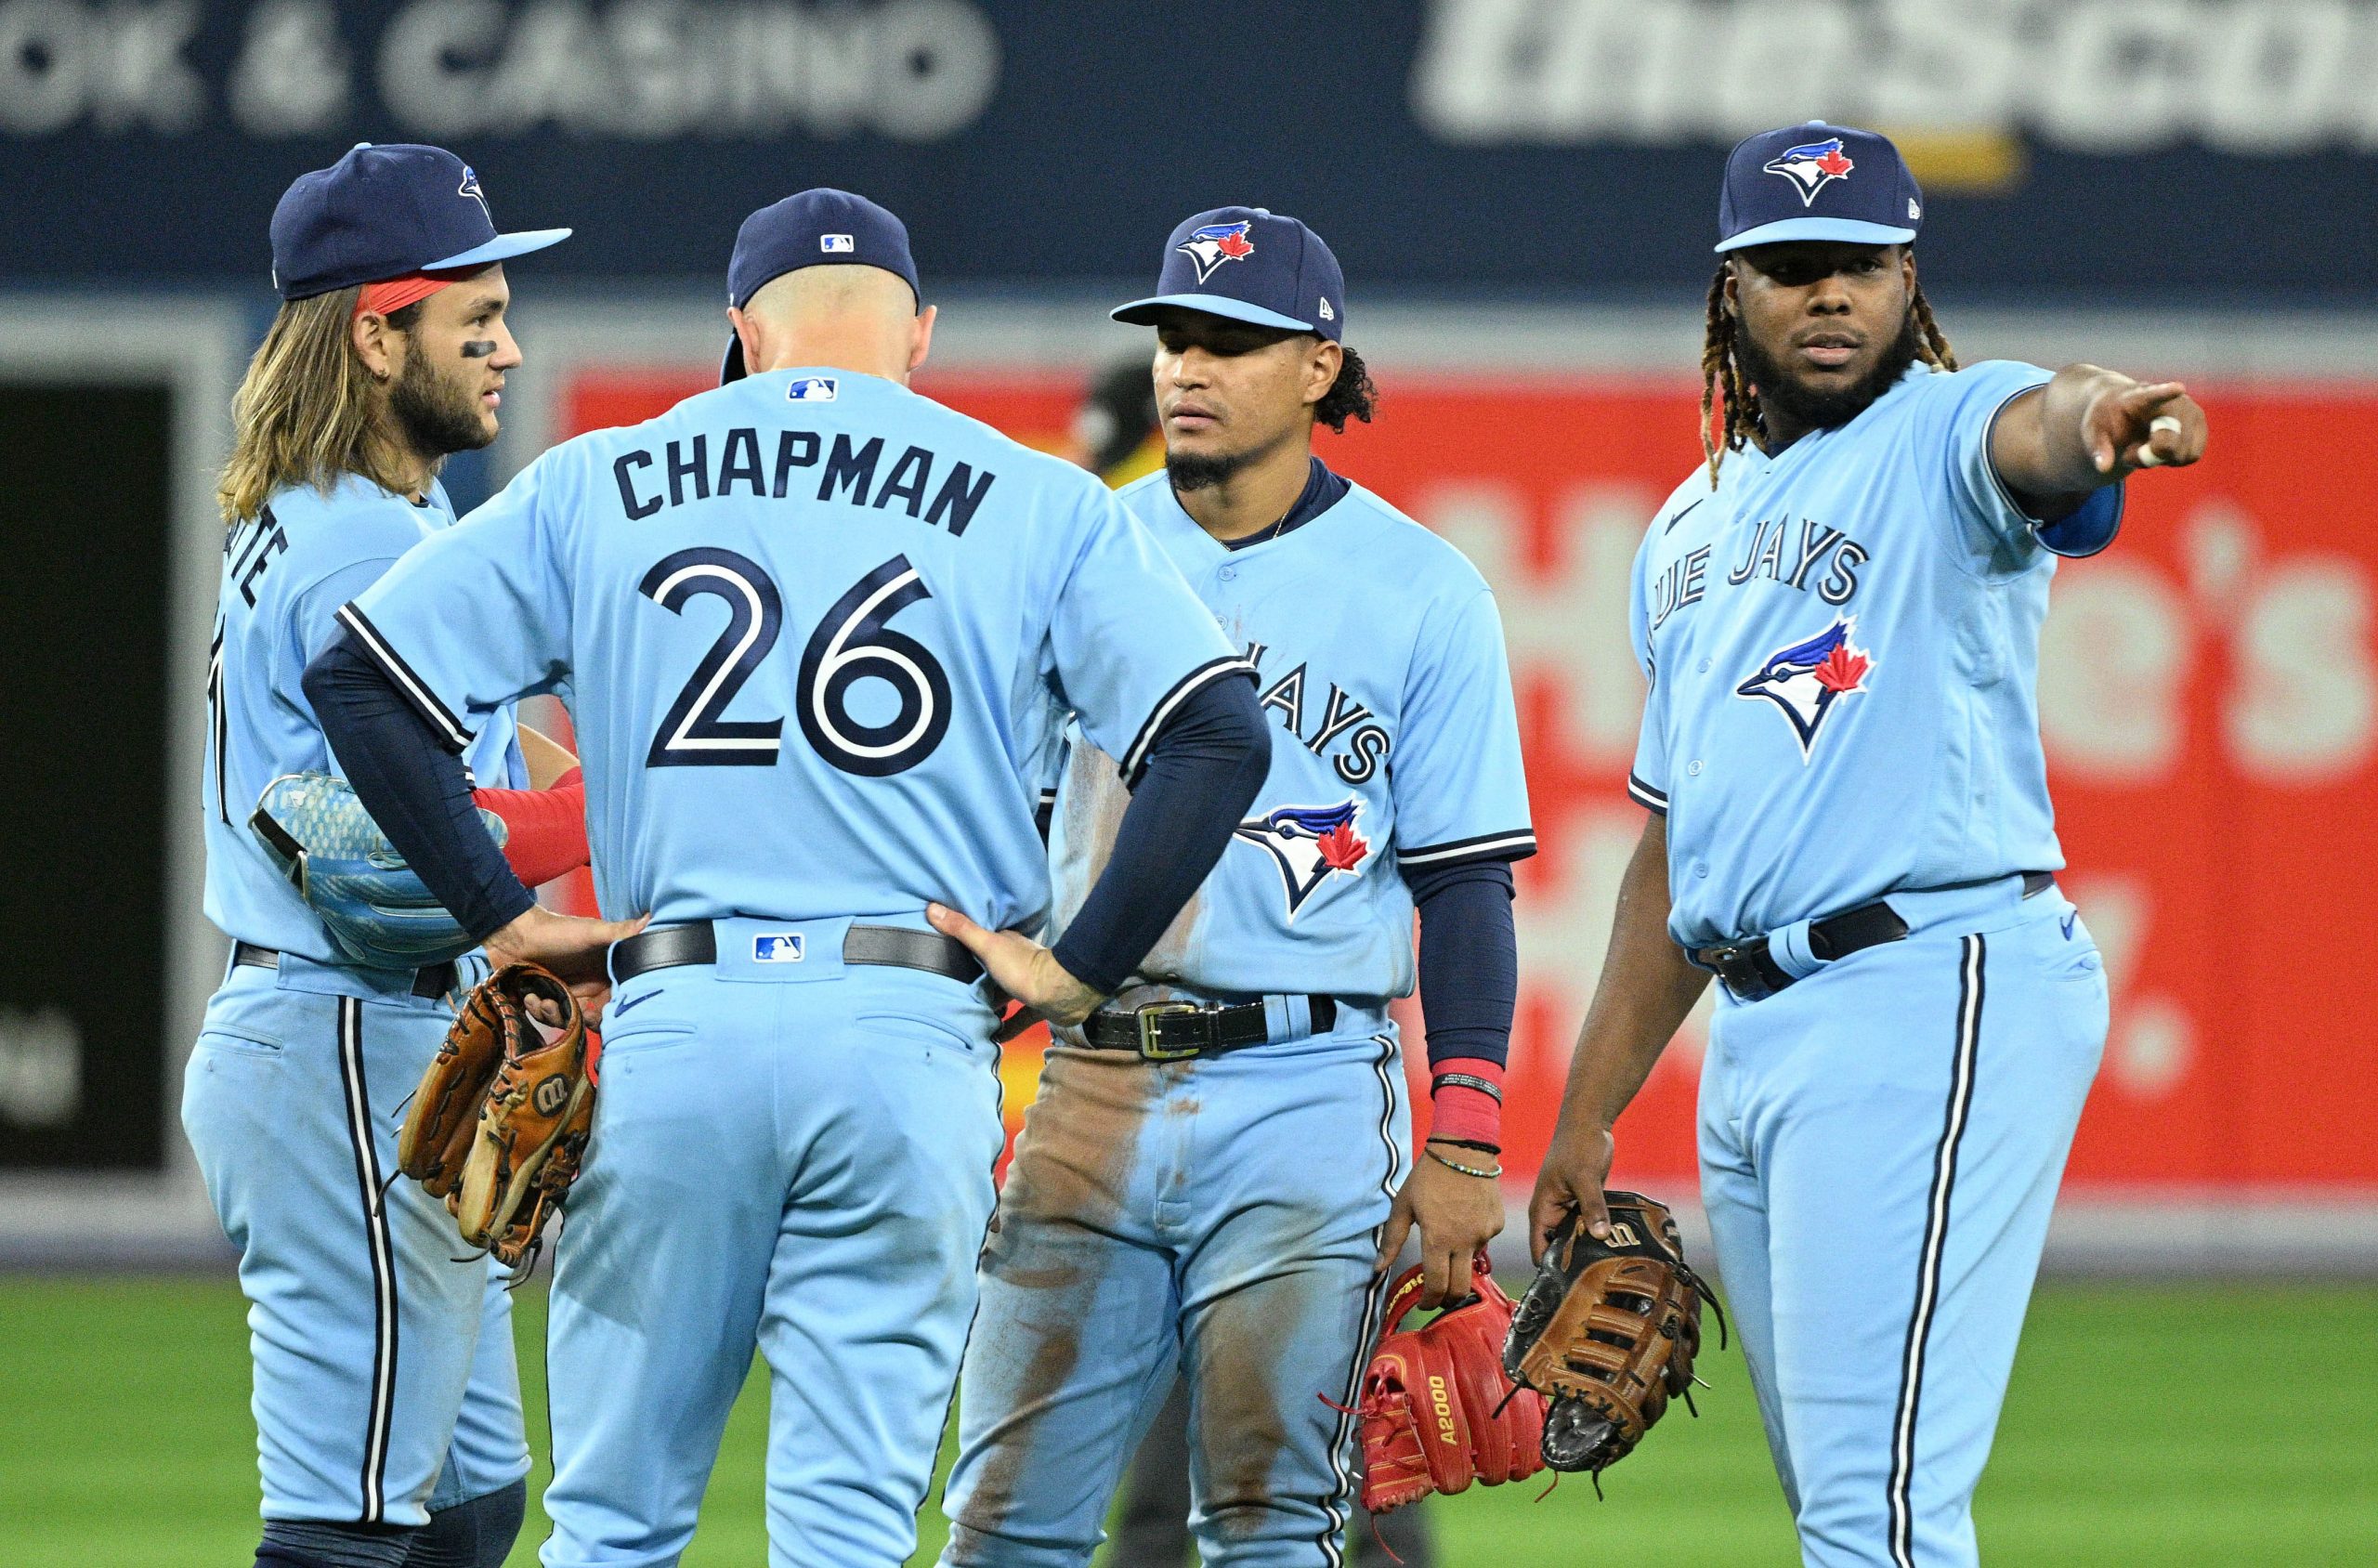 Toronto Blue Jays first baseman Vladimir Guerrero Jr. (27) gestures as he speaks with second baseman Santiago Espinal (5) and third baseman Mark Chapman (26) and shortstop Bo Bichette (11) in the eighth inning against the Oakland Athletics at Rogers Centre.